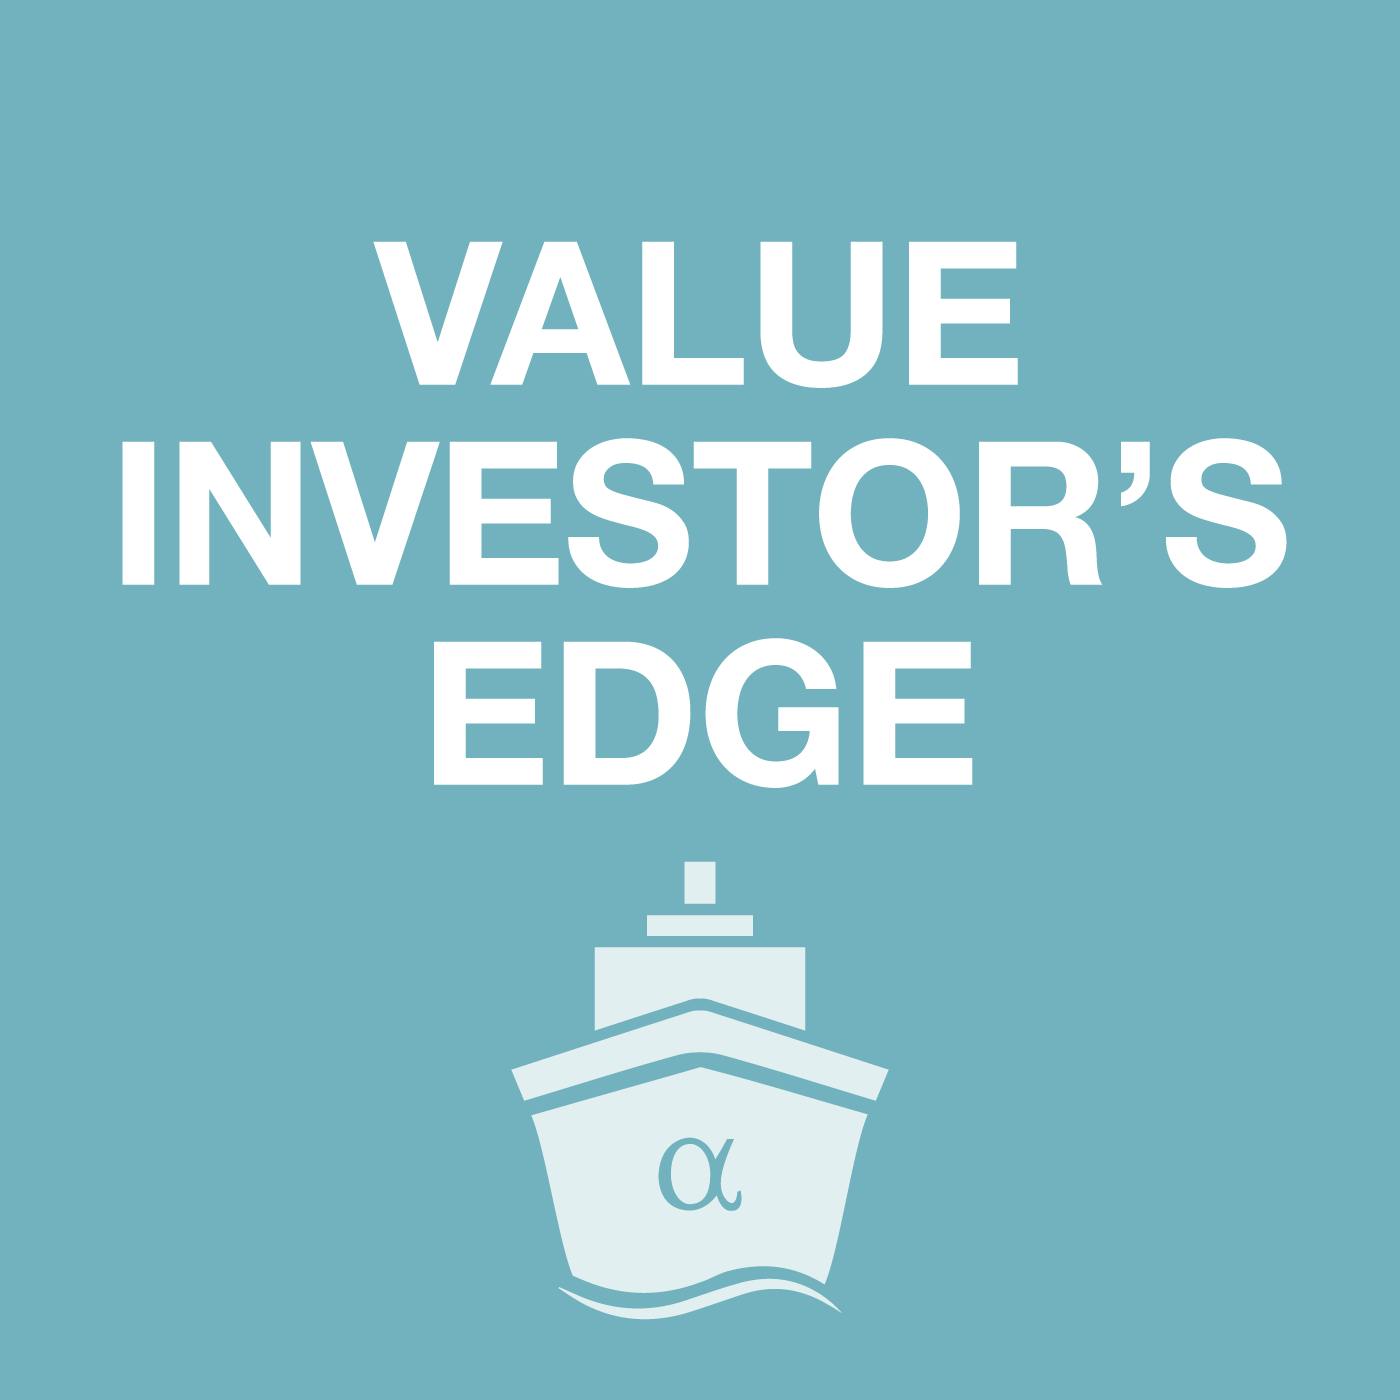 Value Investor's Edge Live #16: Virtual Investor Forum on COVID-19 and Oil Price War, With Teekay LNG Partners Management